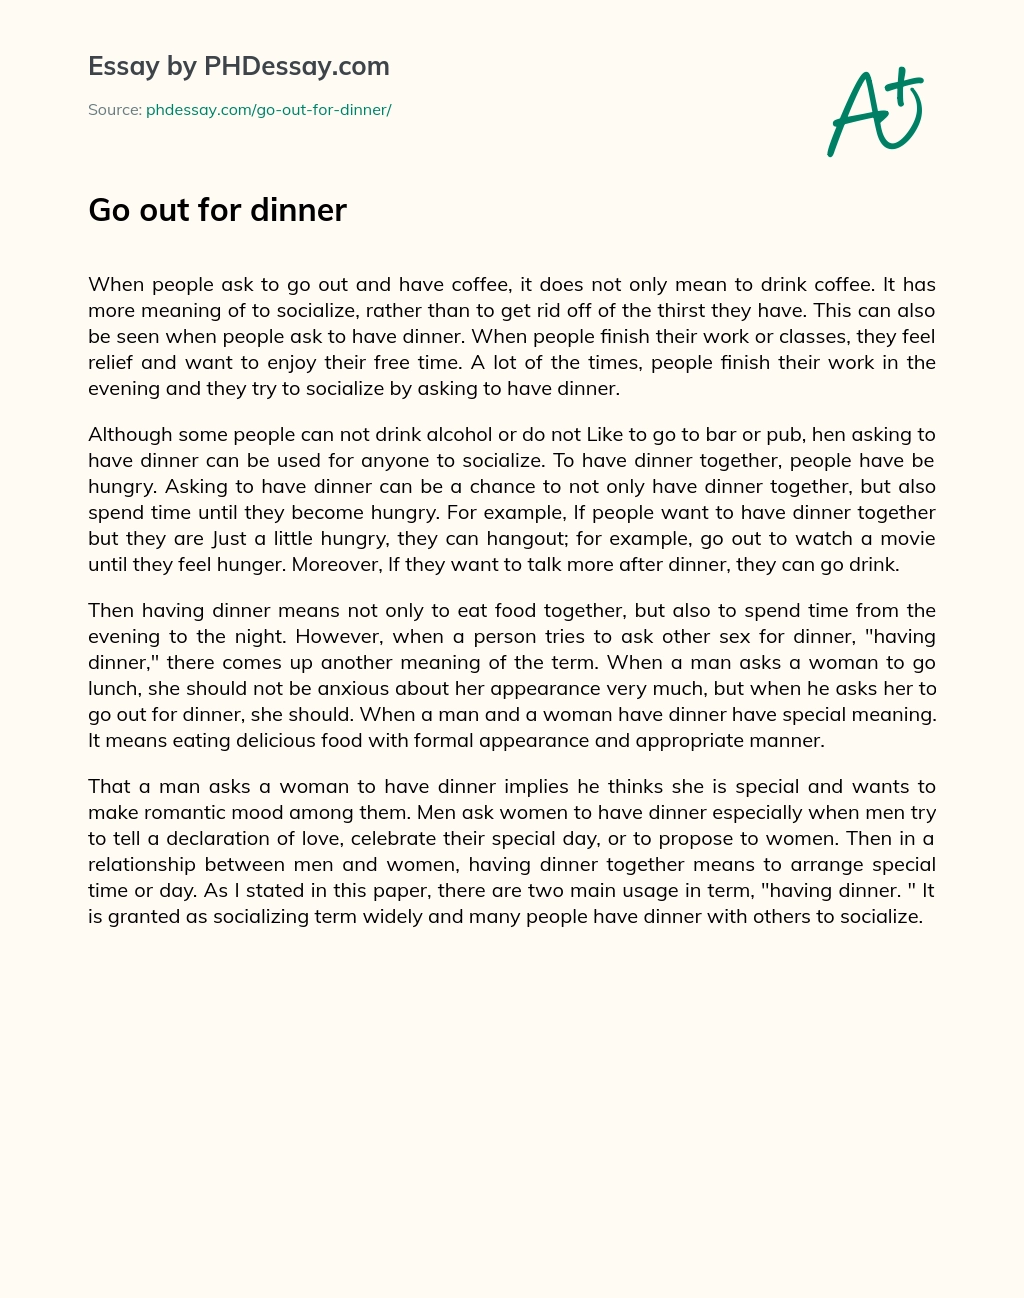 Go out for dinner essay